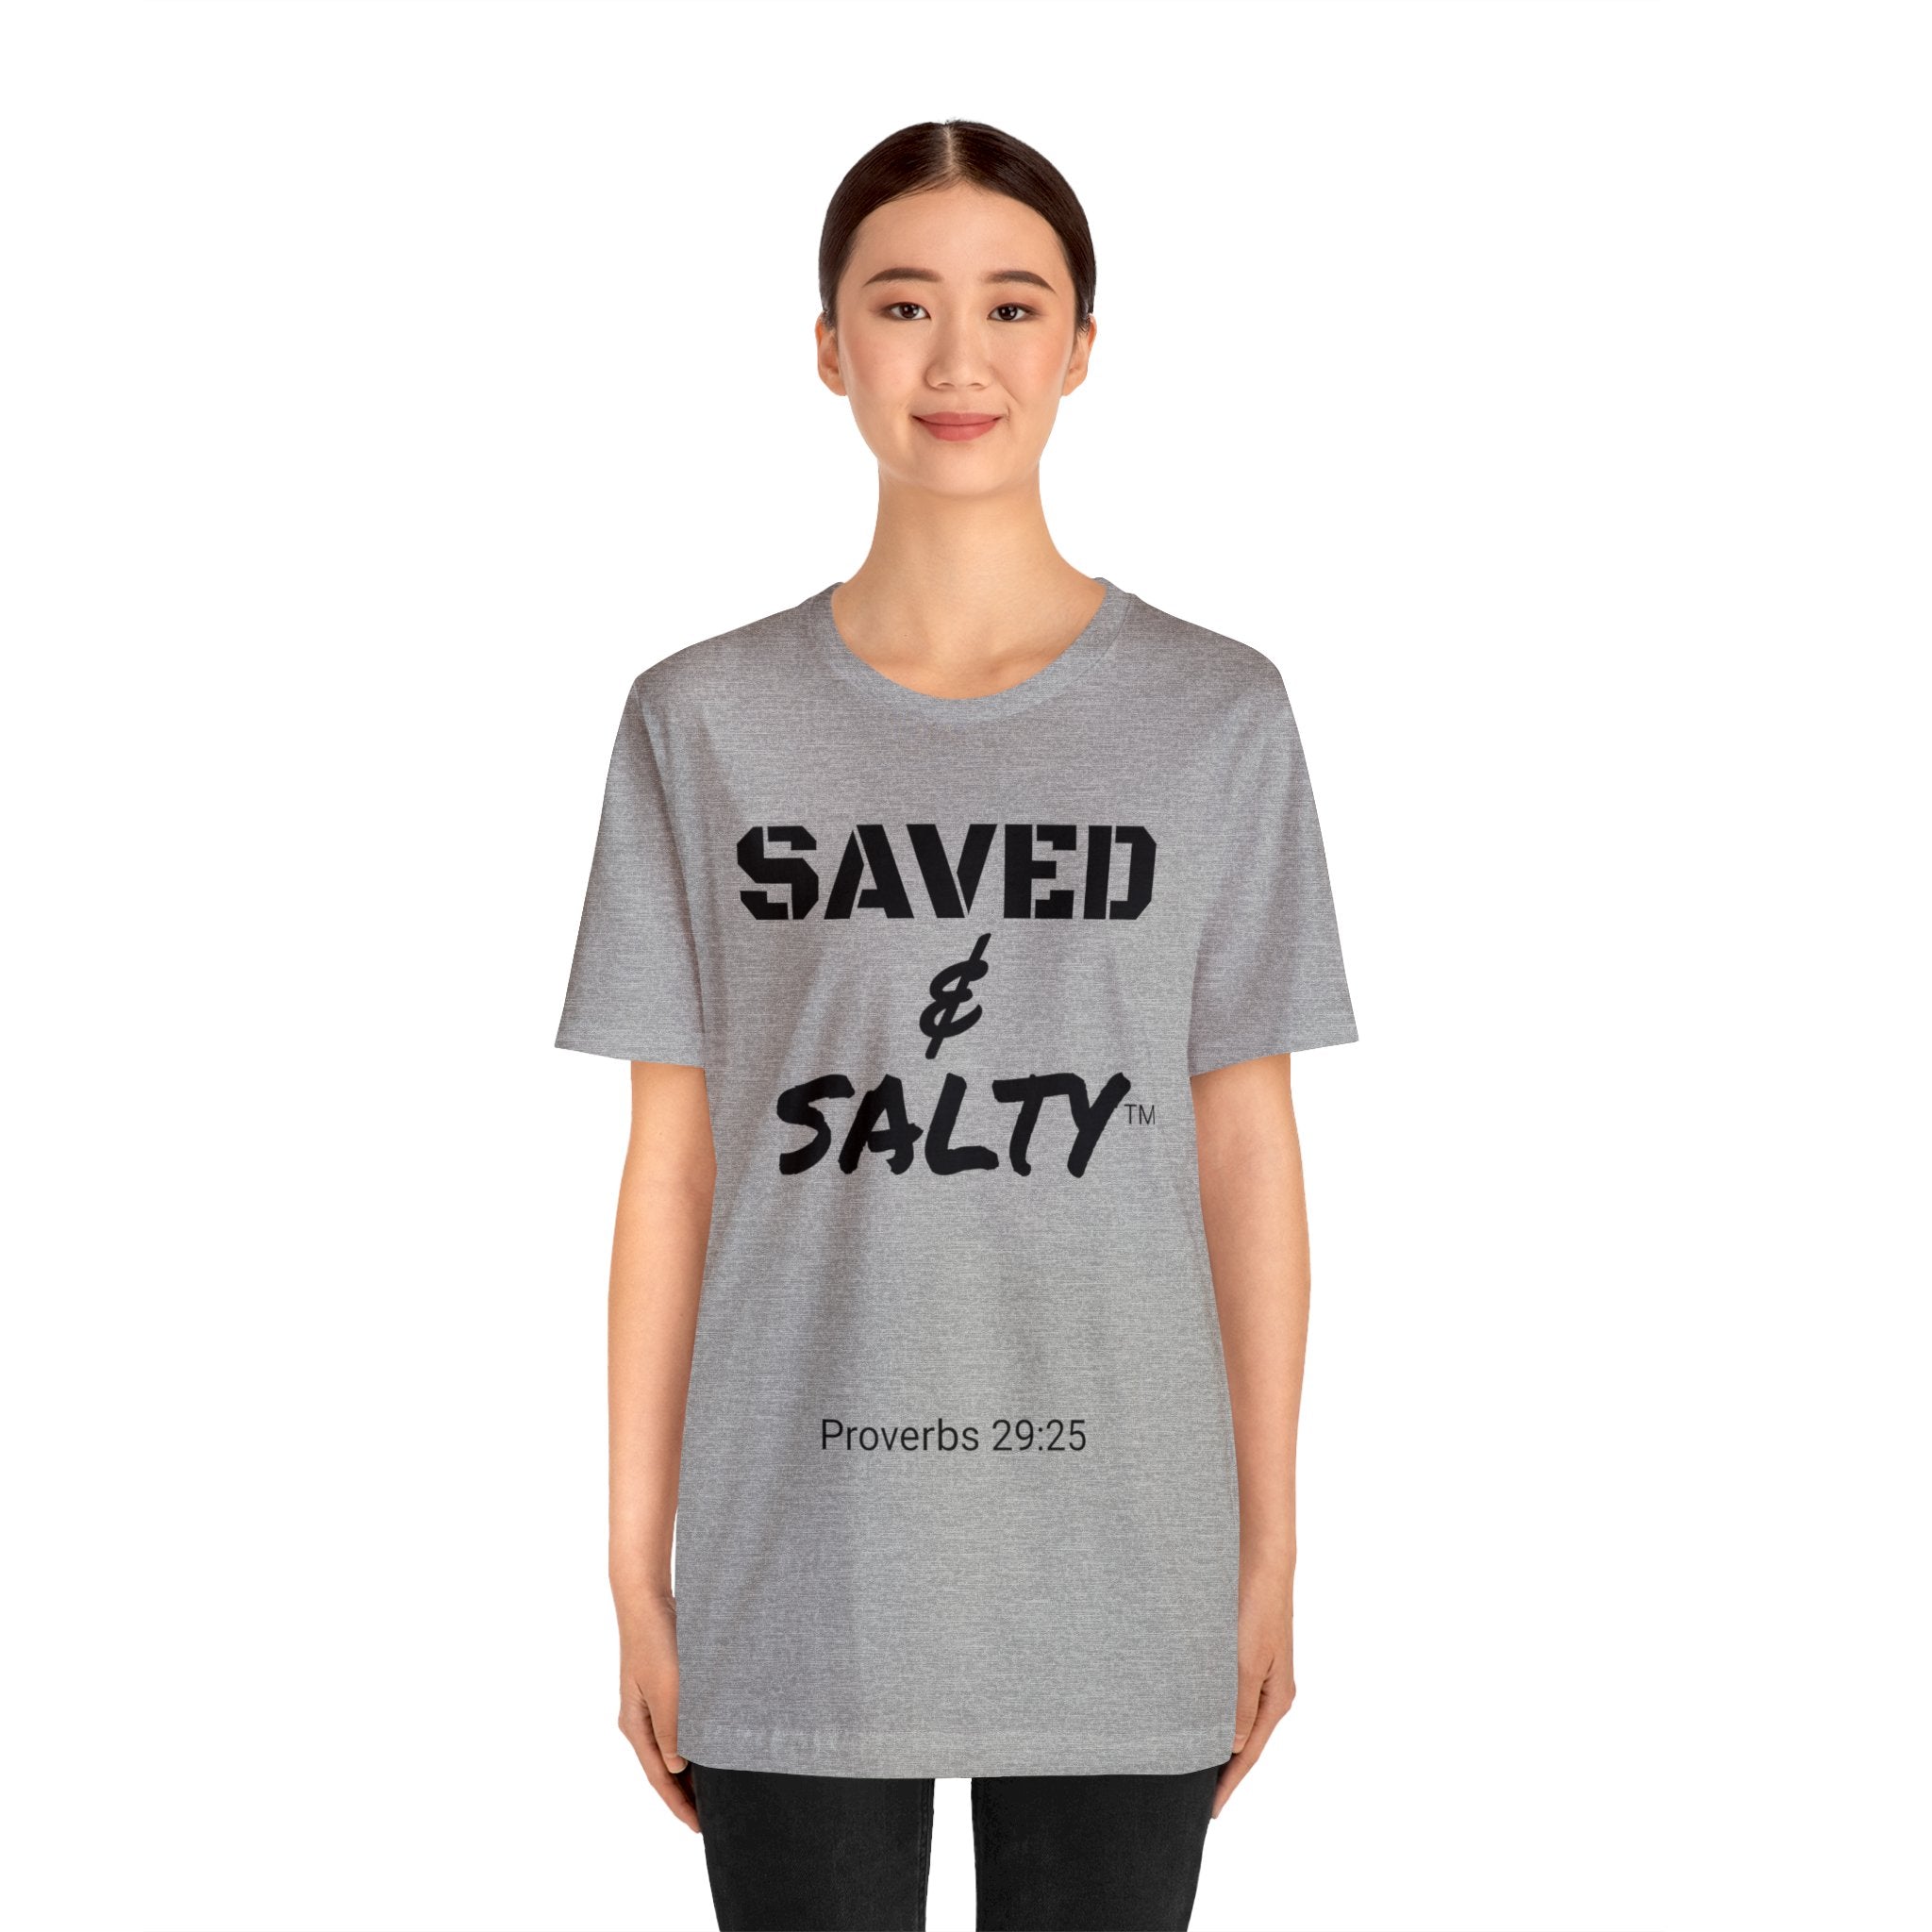 #Saved&Salty #Scripture #Proverbs 29:25 #2Timothy1:7 #Unisex #Jersey #ShortSleeve #Tee